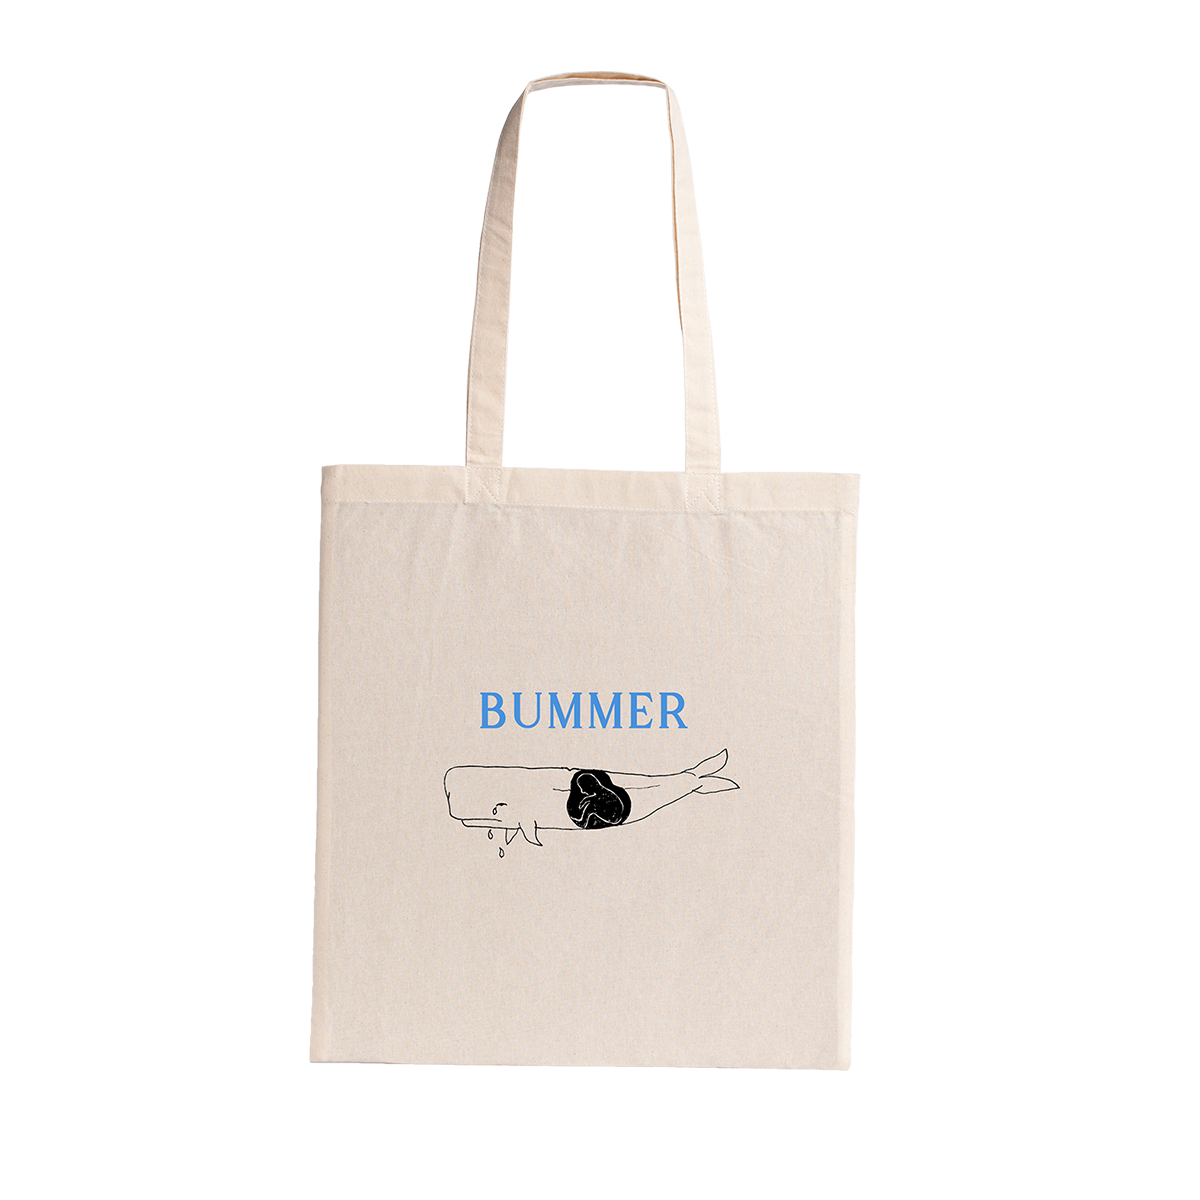 "BUMMER" TOTE